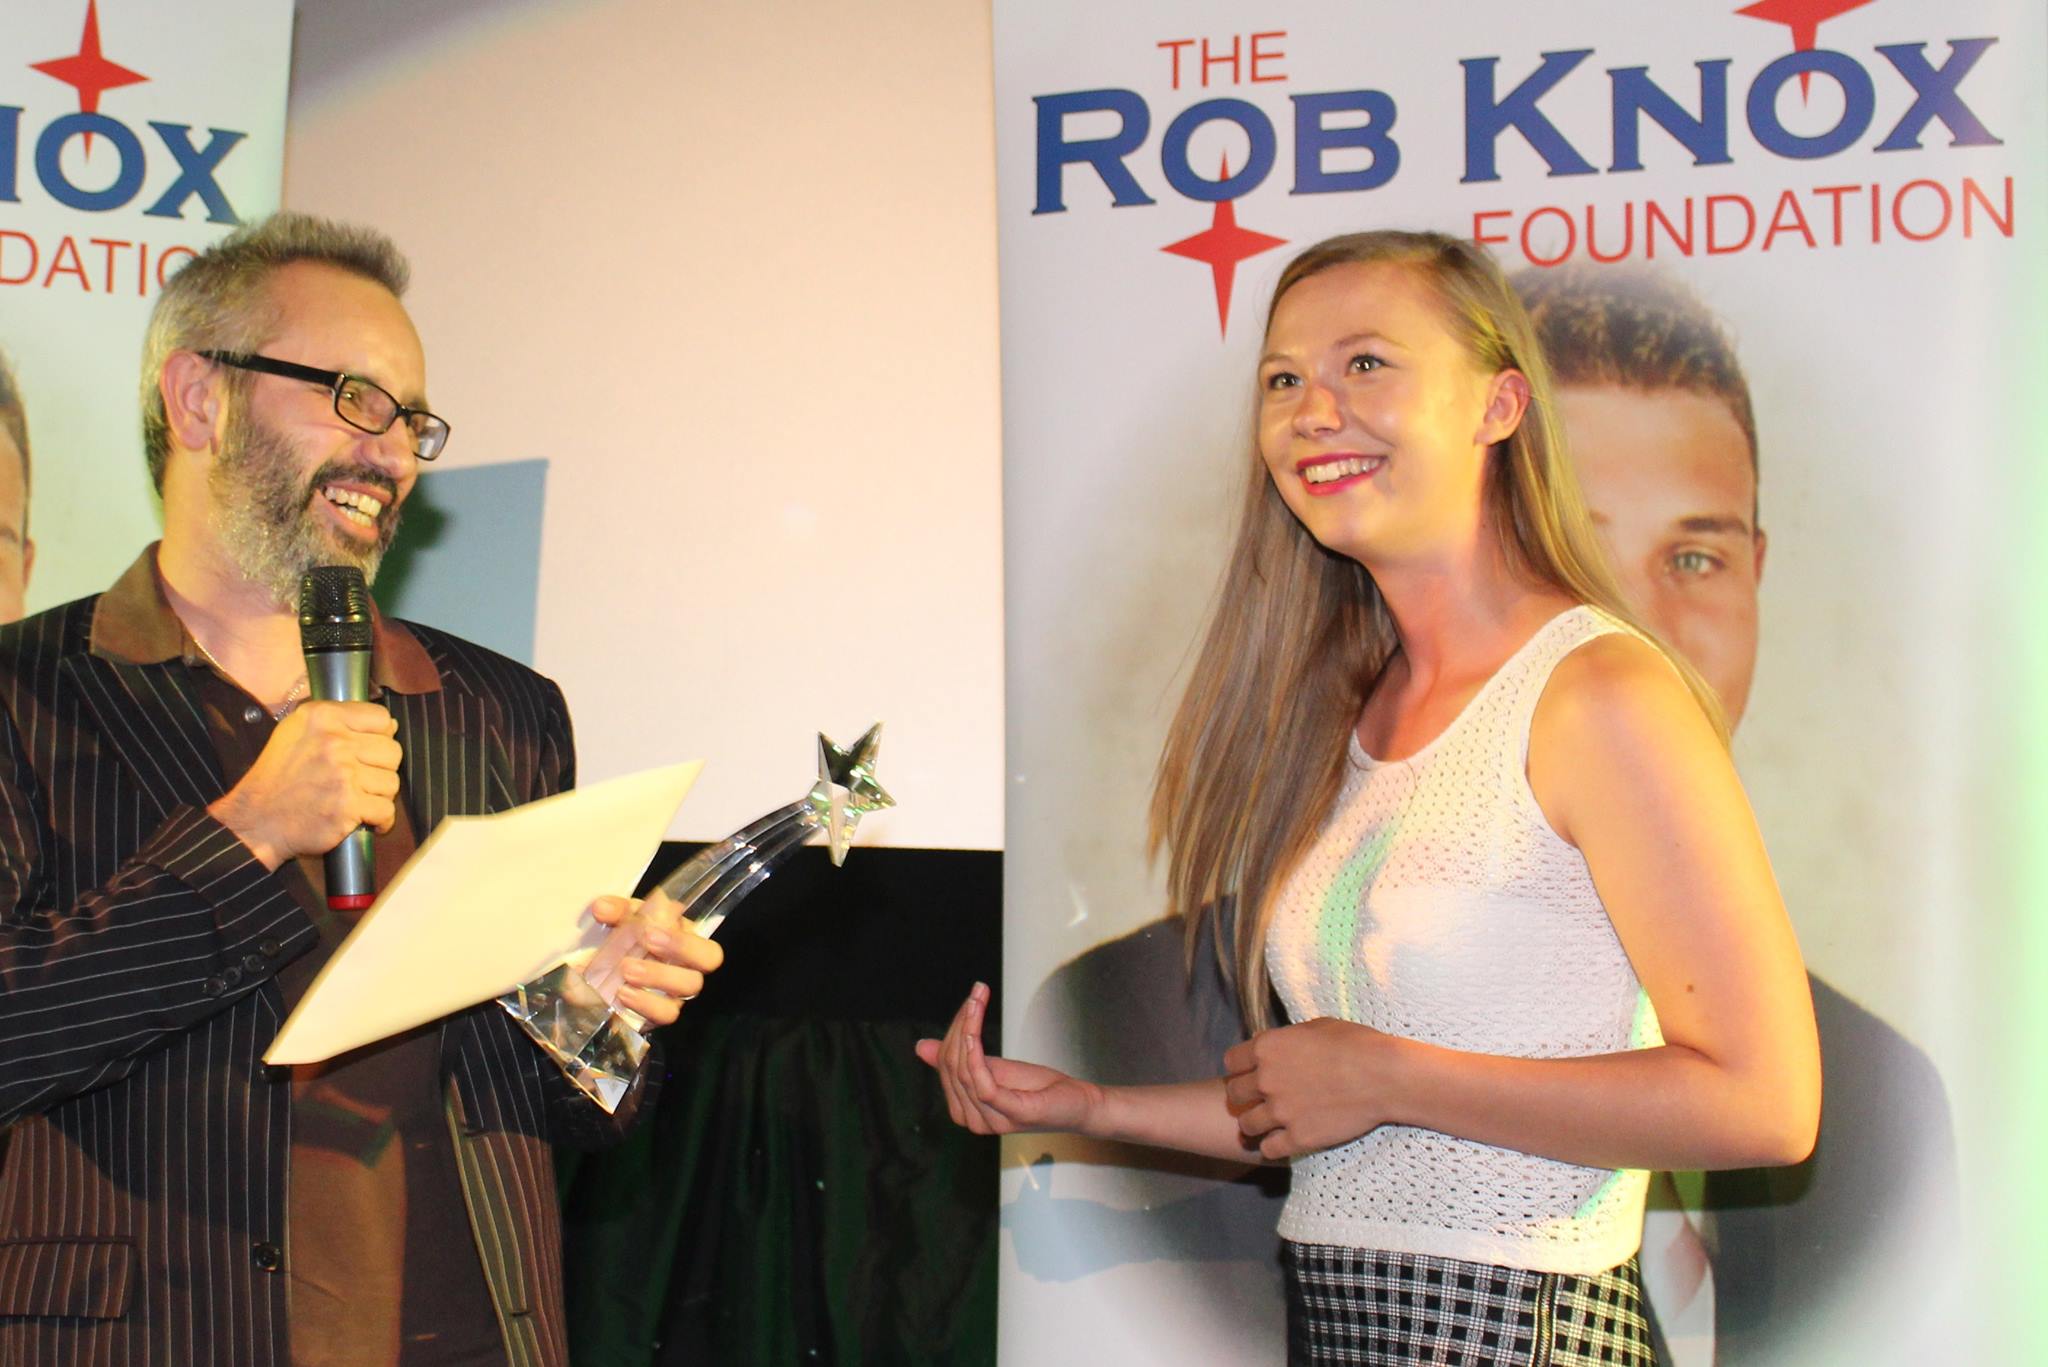 Louise Salter won the 99% award at Rob Knox Film Festival. She was presented the award by Emmy-nominated producer Enrico Tessarin.